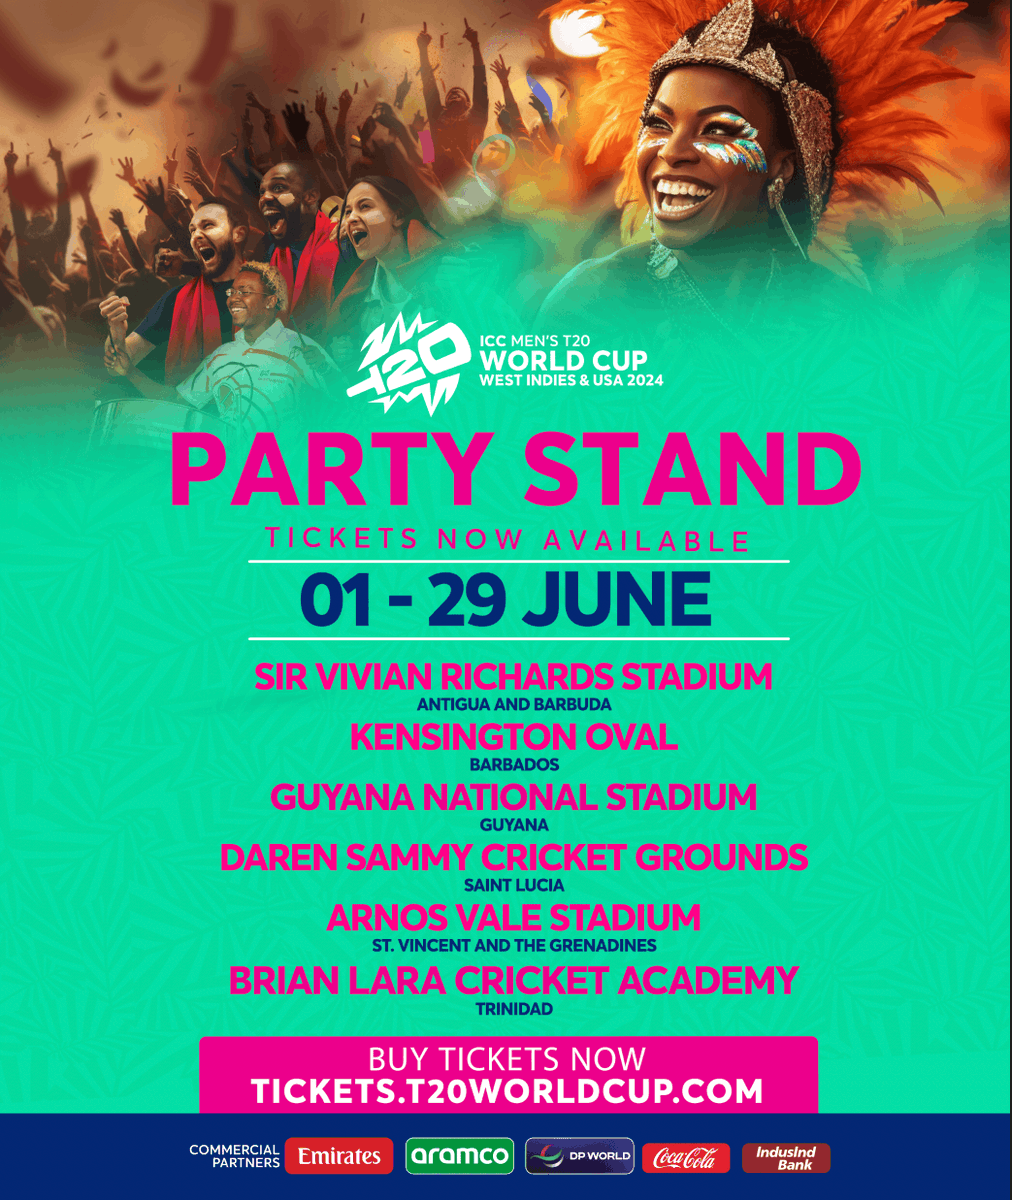 More vibes!🍻More action!💥 Get your party stand tickets for the ICC Men's T20 World Cup! Get tickets⬇️ tickets.t20worldcup.com #T20WorldCup